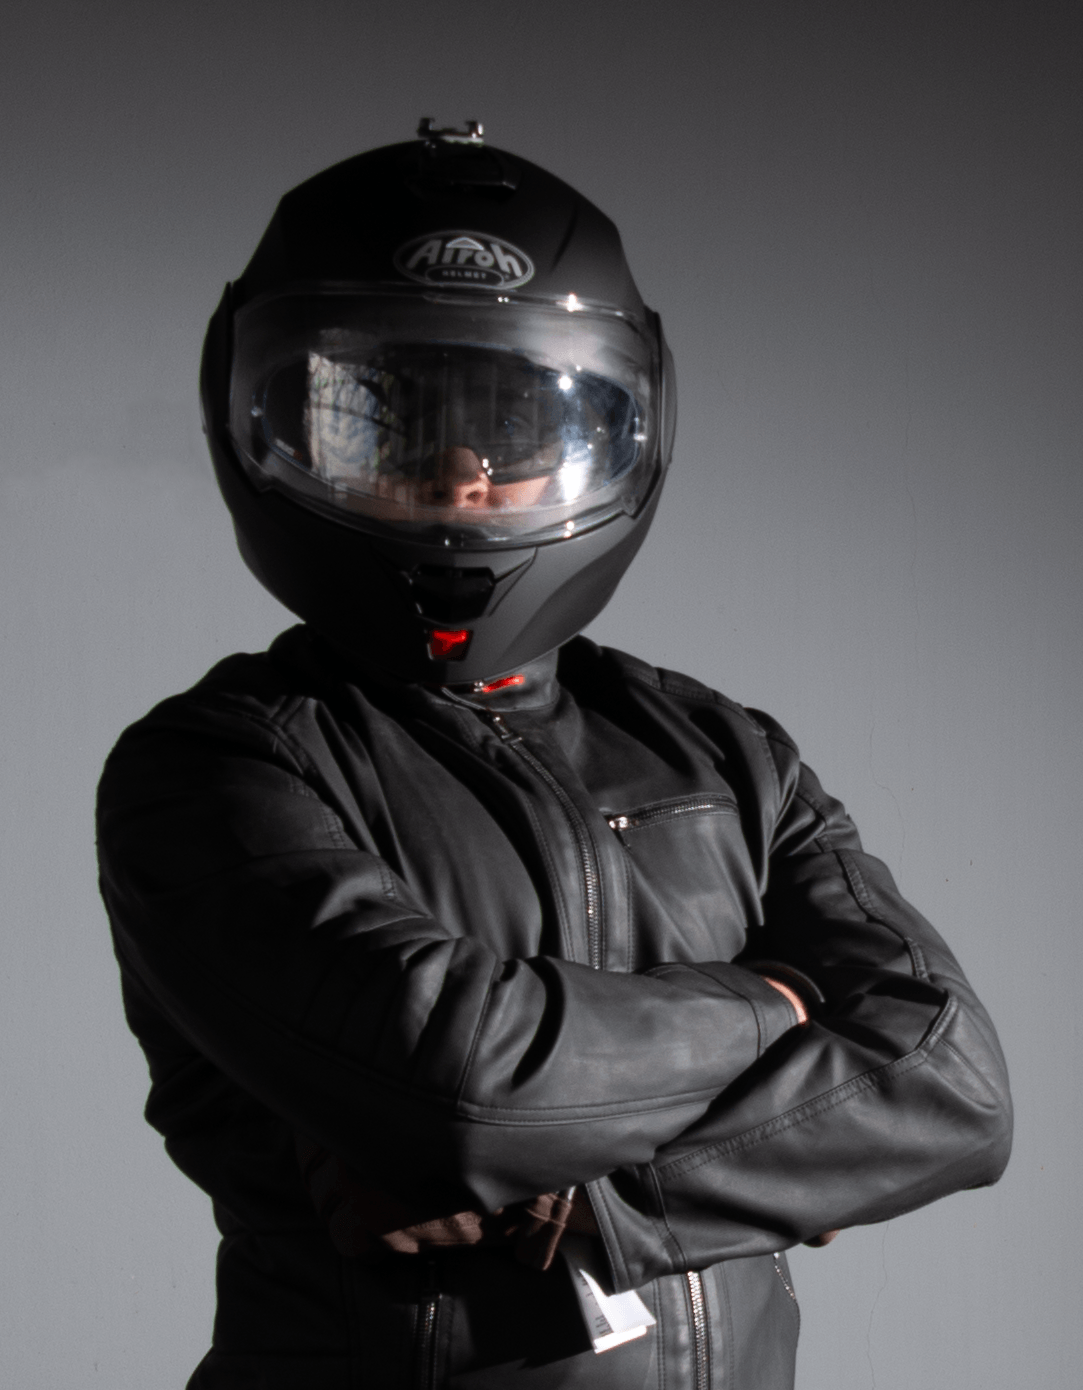 A man wearing a helmet and a leather jacket with his arms crossed